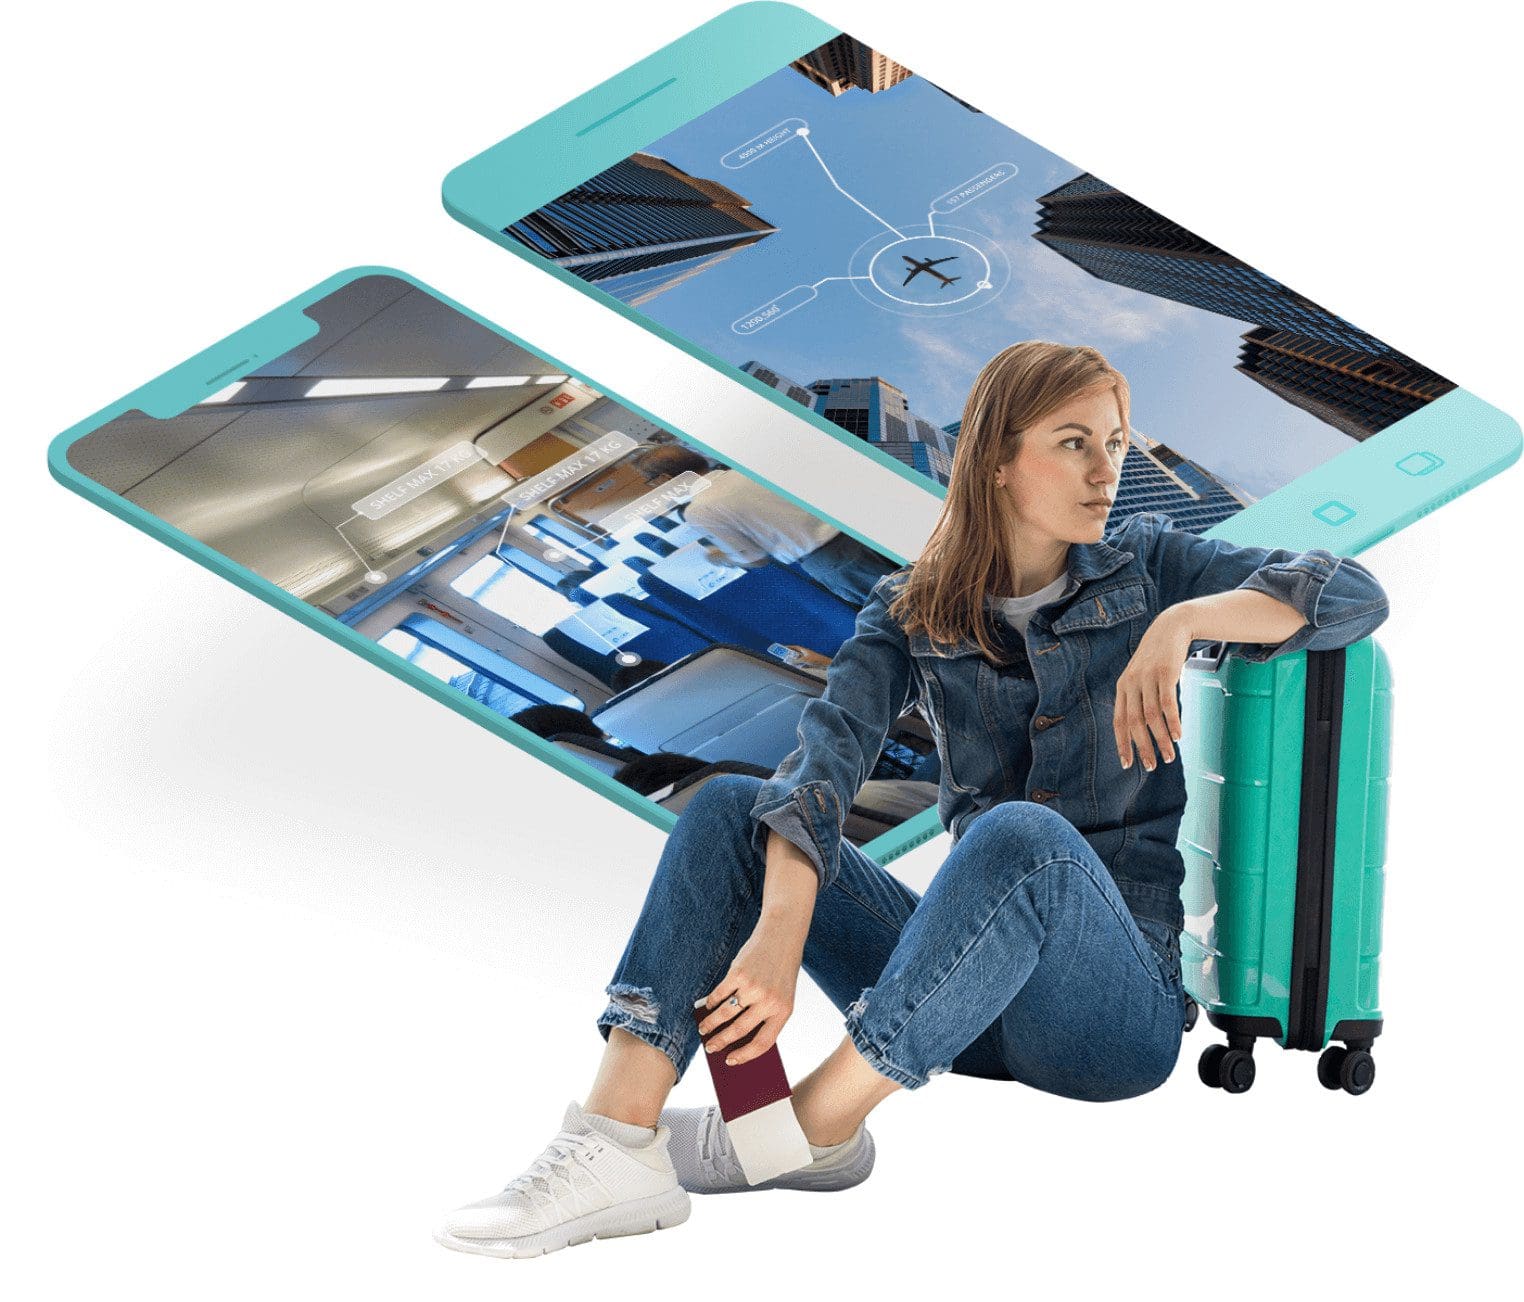 Mobile applications with augmented reality features to engage travelers and increase retention